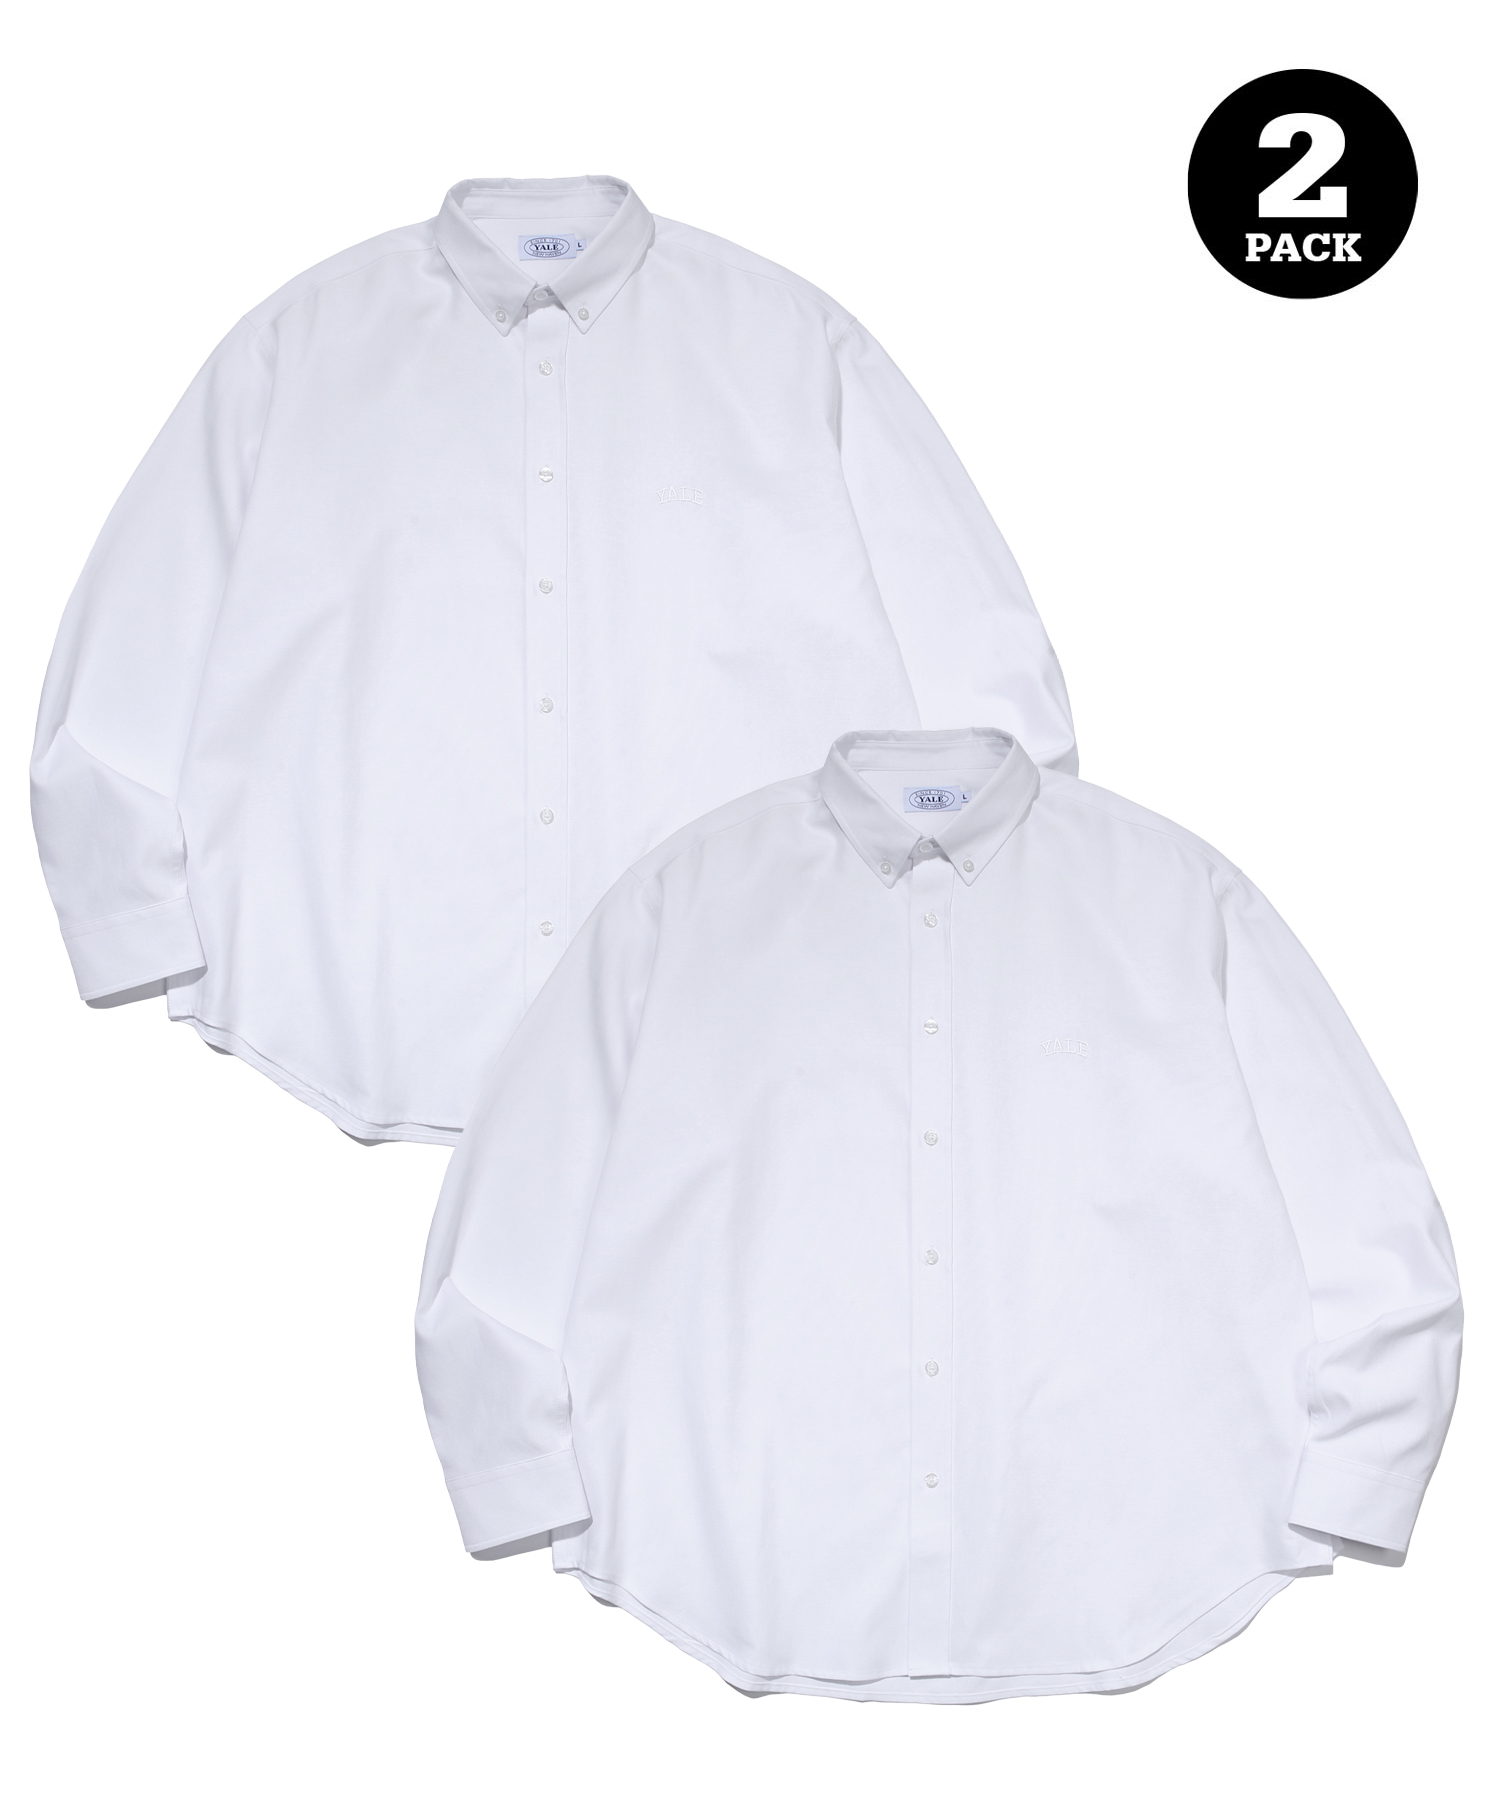 (24SS) [ONEMILE WEAR] 2PACK OXFORD BIG SHIRT WHITE / NAVY